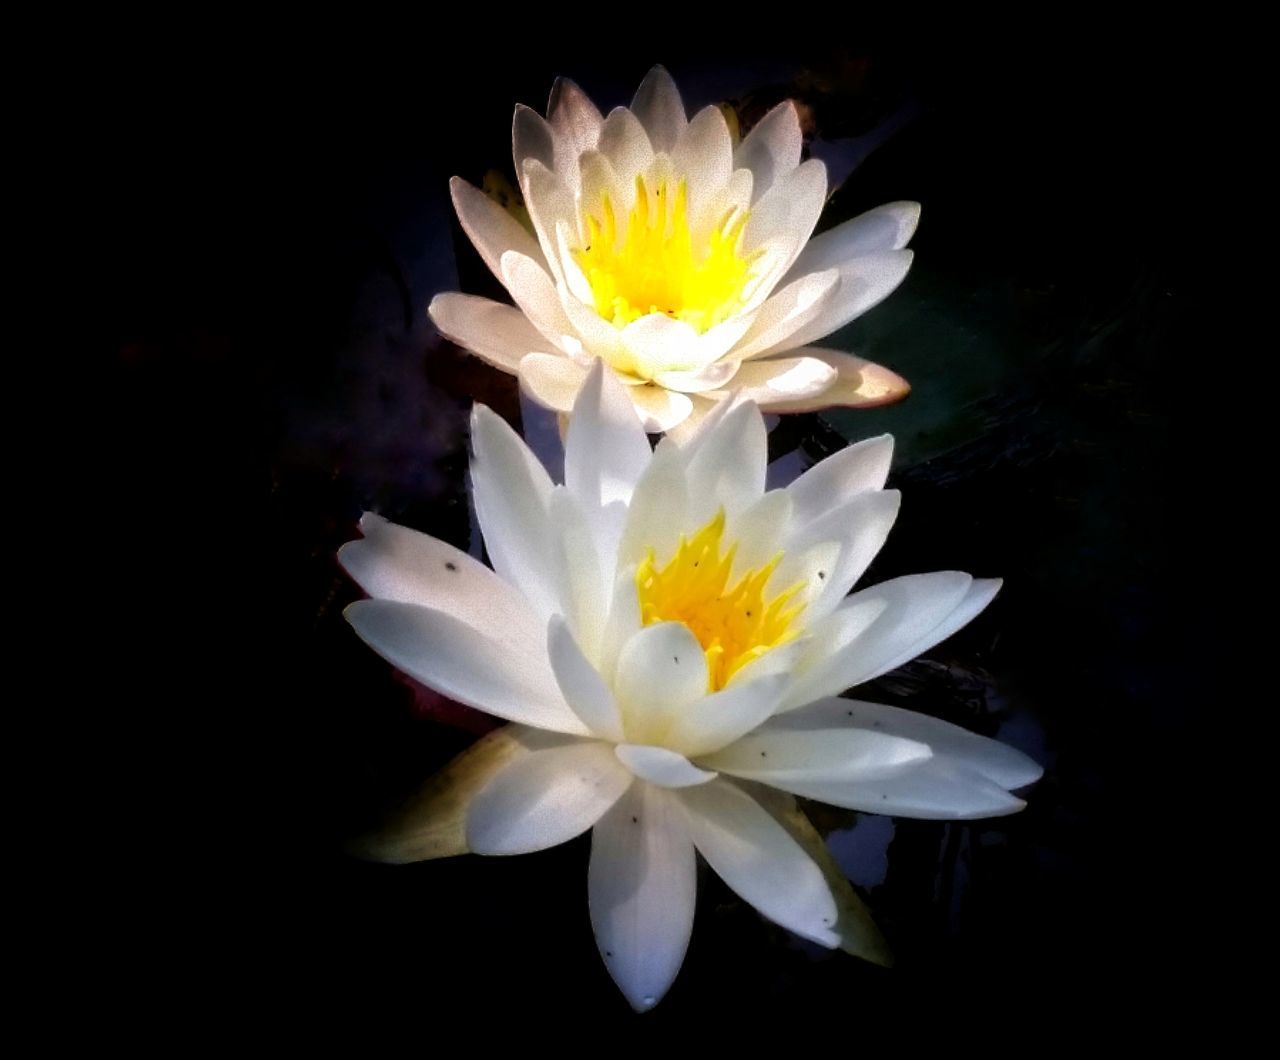 CLOSE-UP OF FRESH WHITE FLOWER BLOOMING IN BLACK BACKGROUND